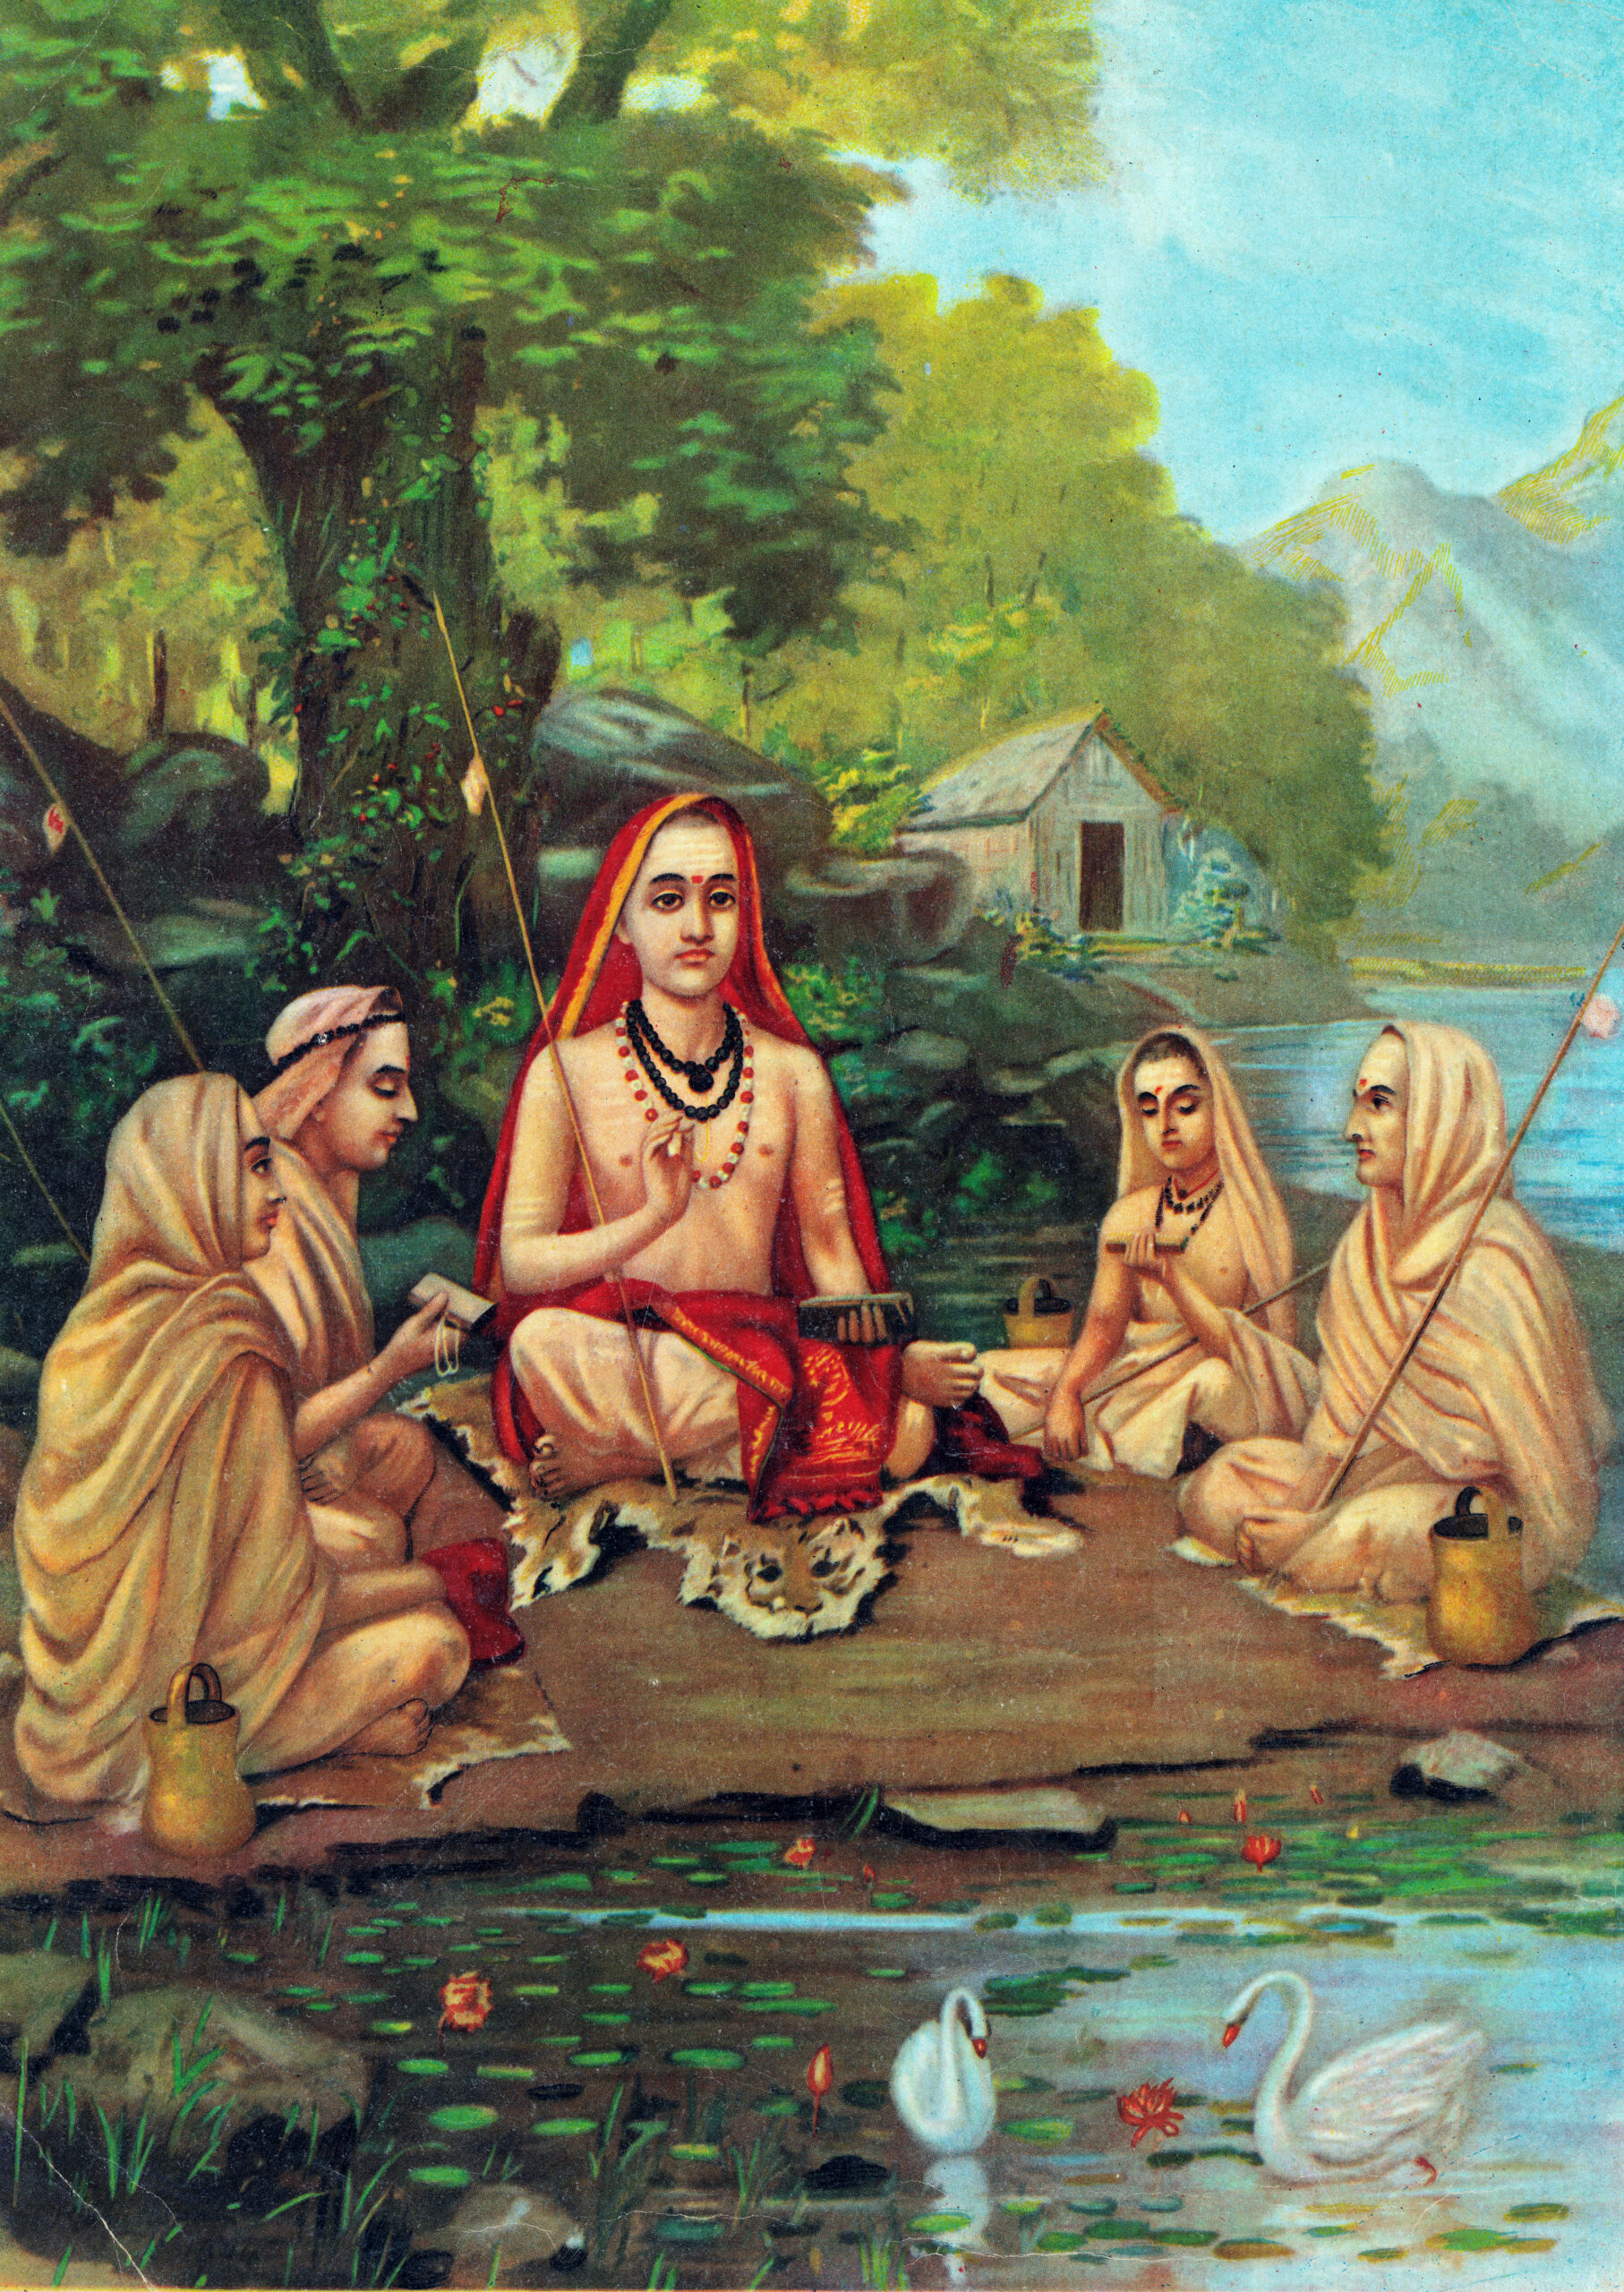 Which are places which Adi Shankaracharya visited?